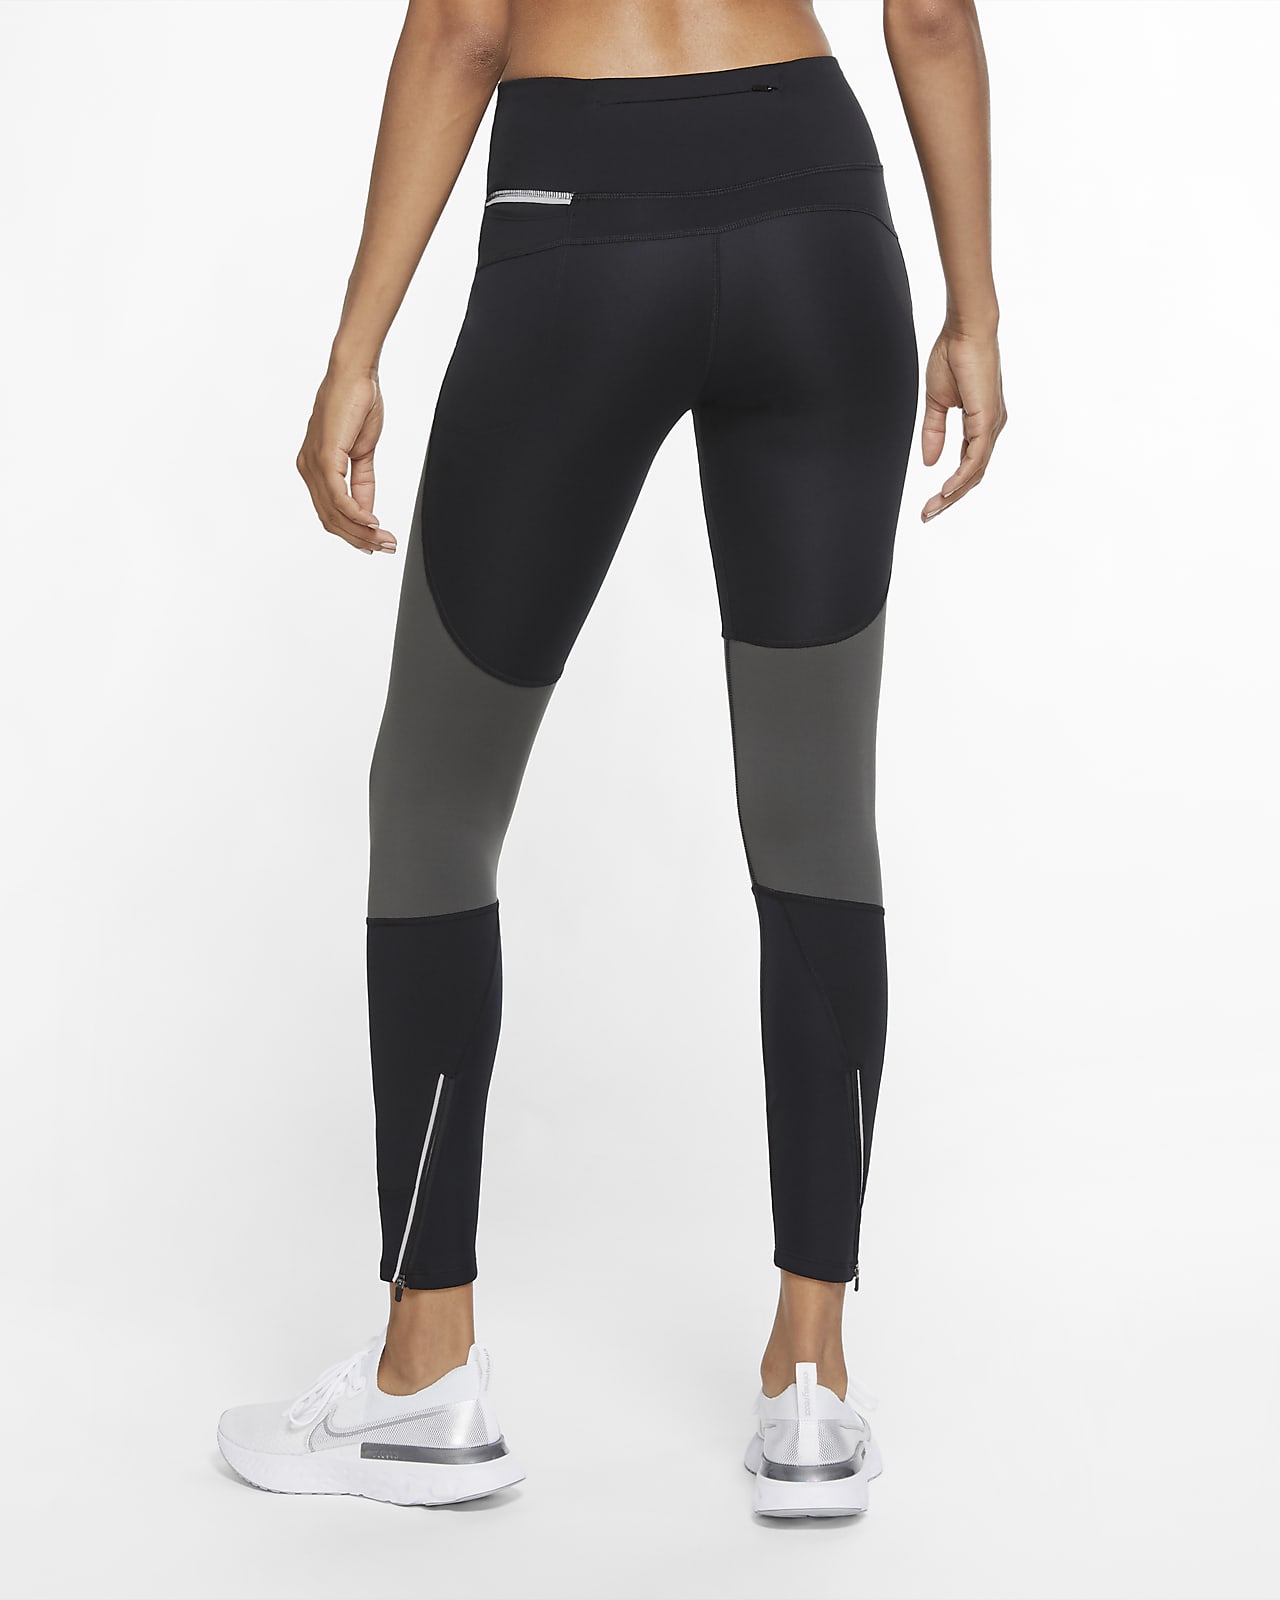 epic lux running tights nike